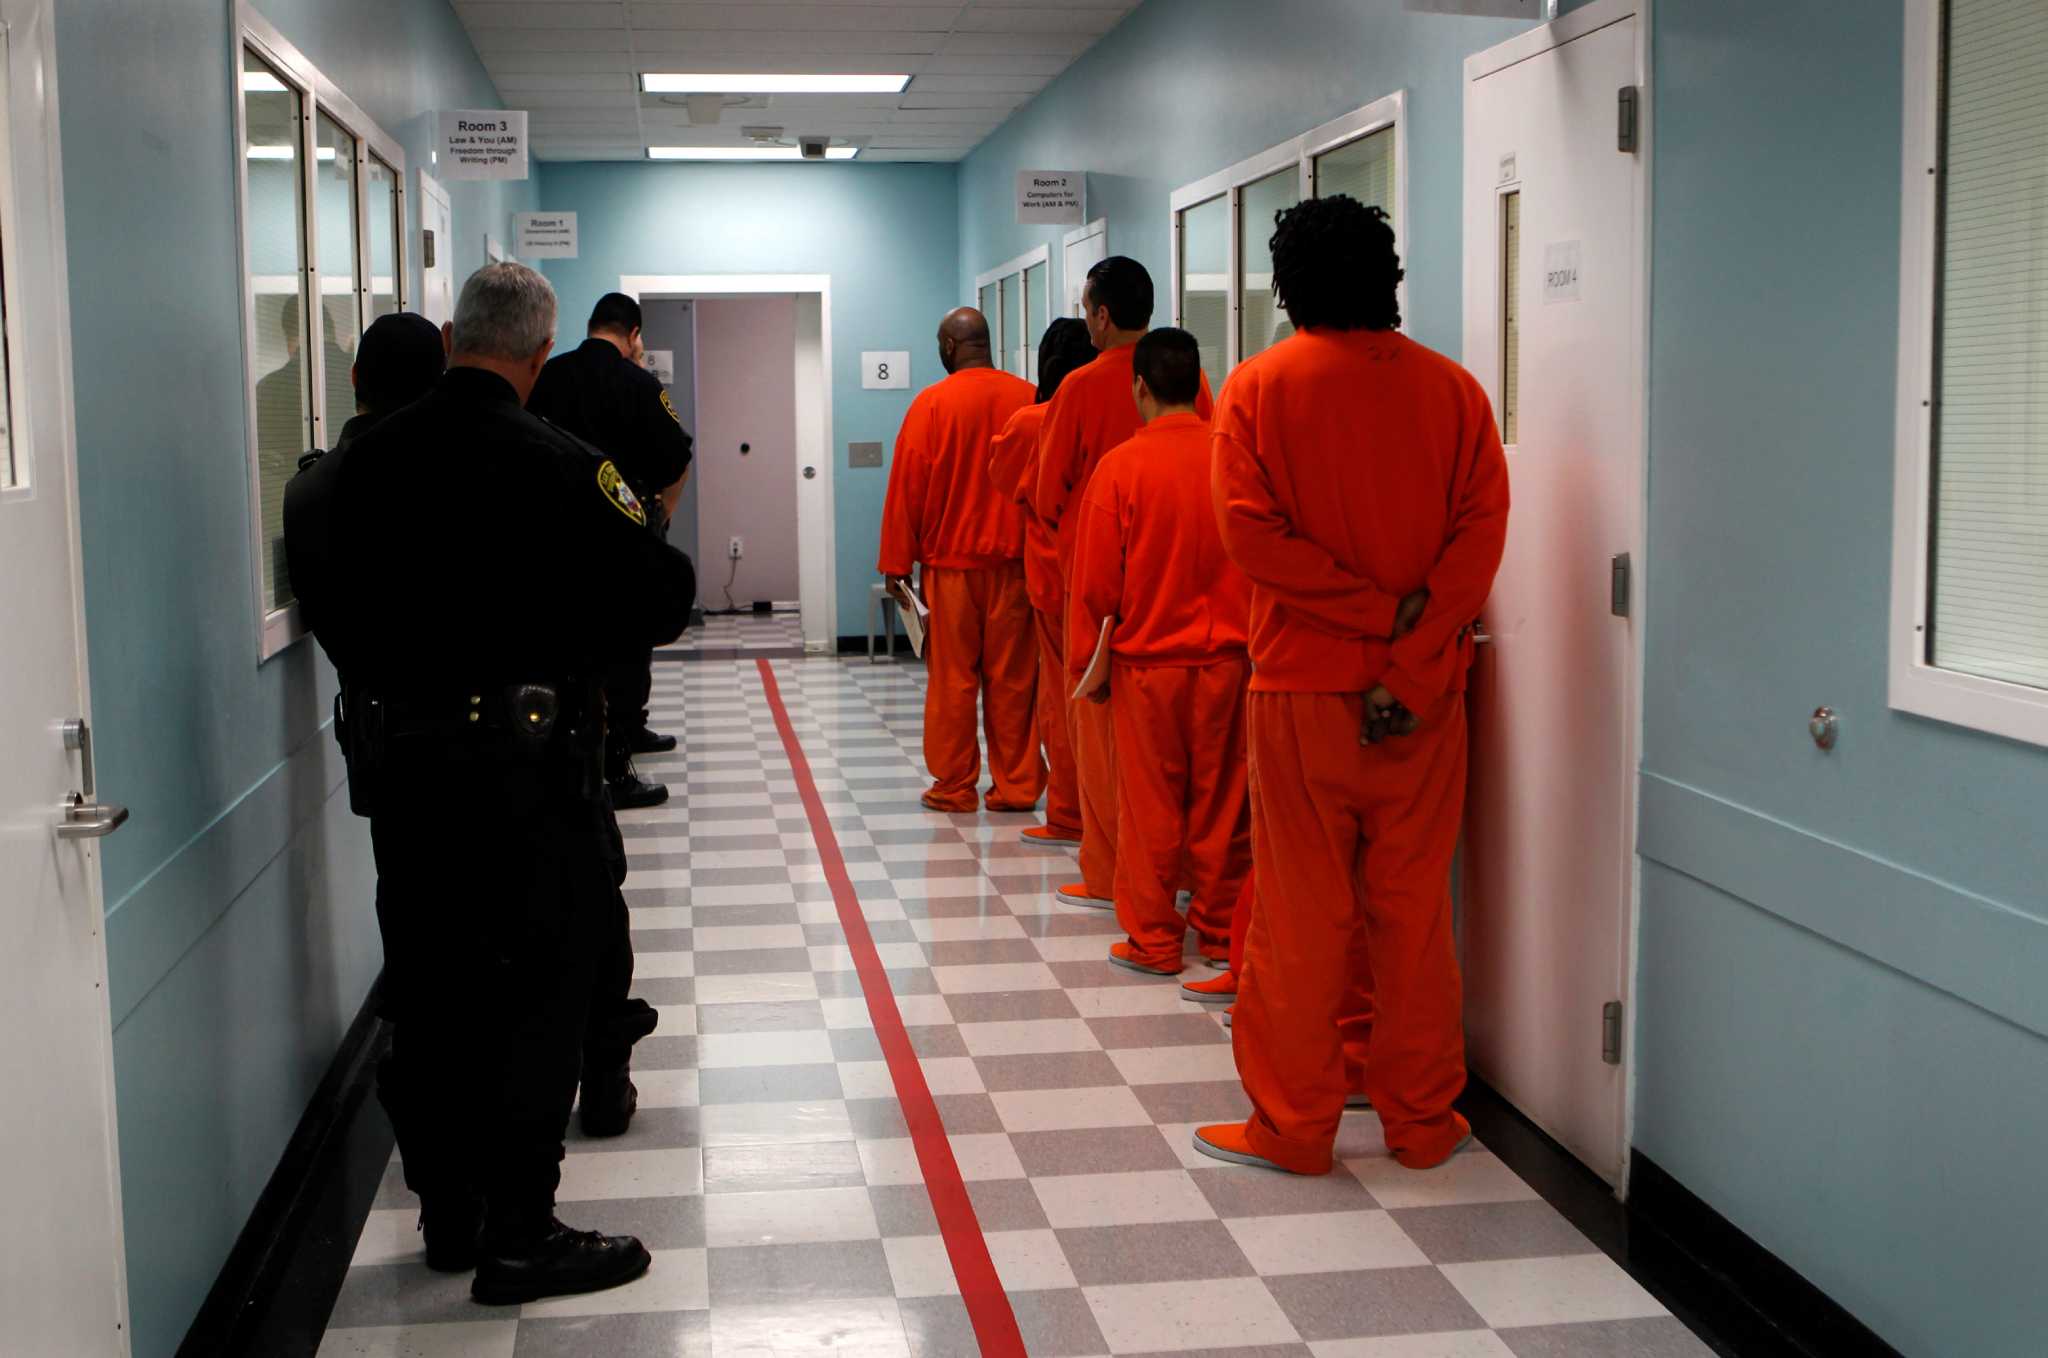 The inmate died after deputies attempted to search him at San Francisco Cou...